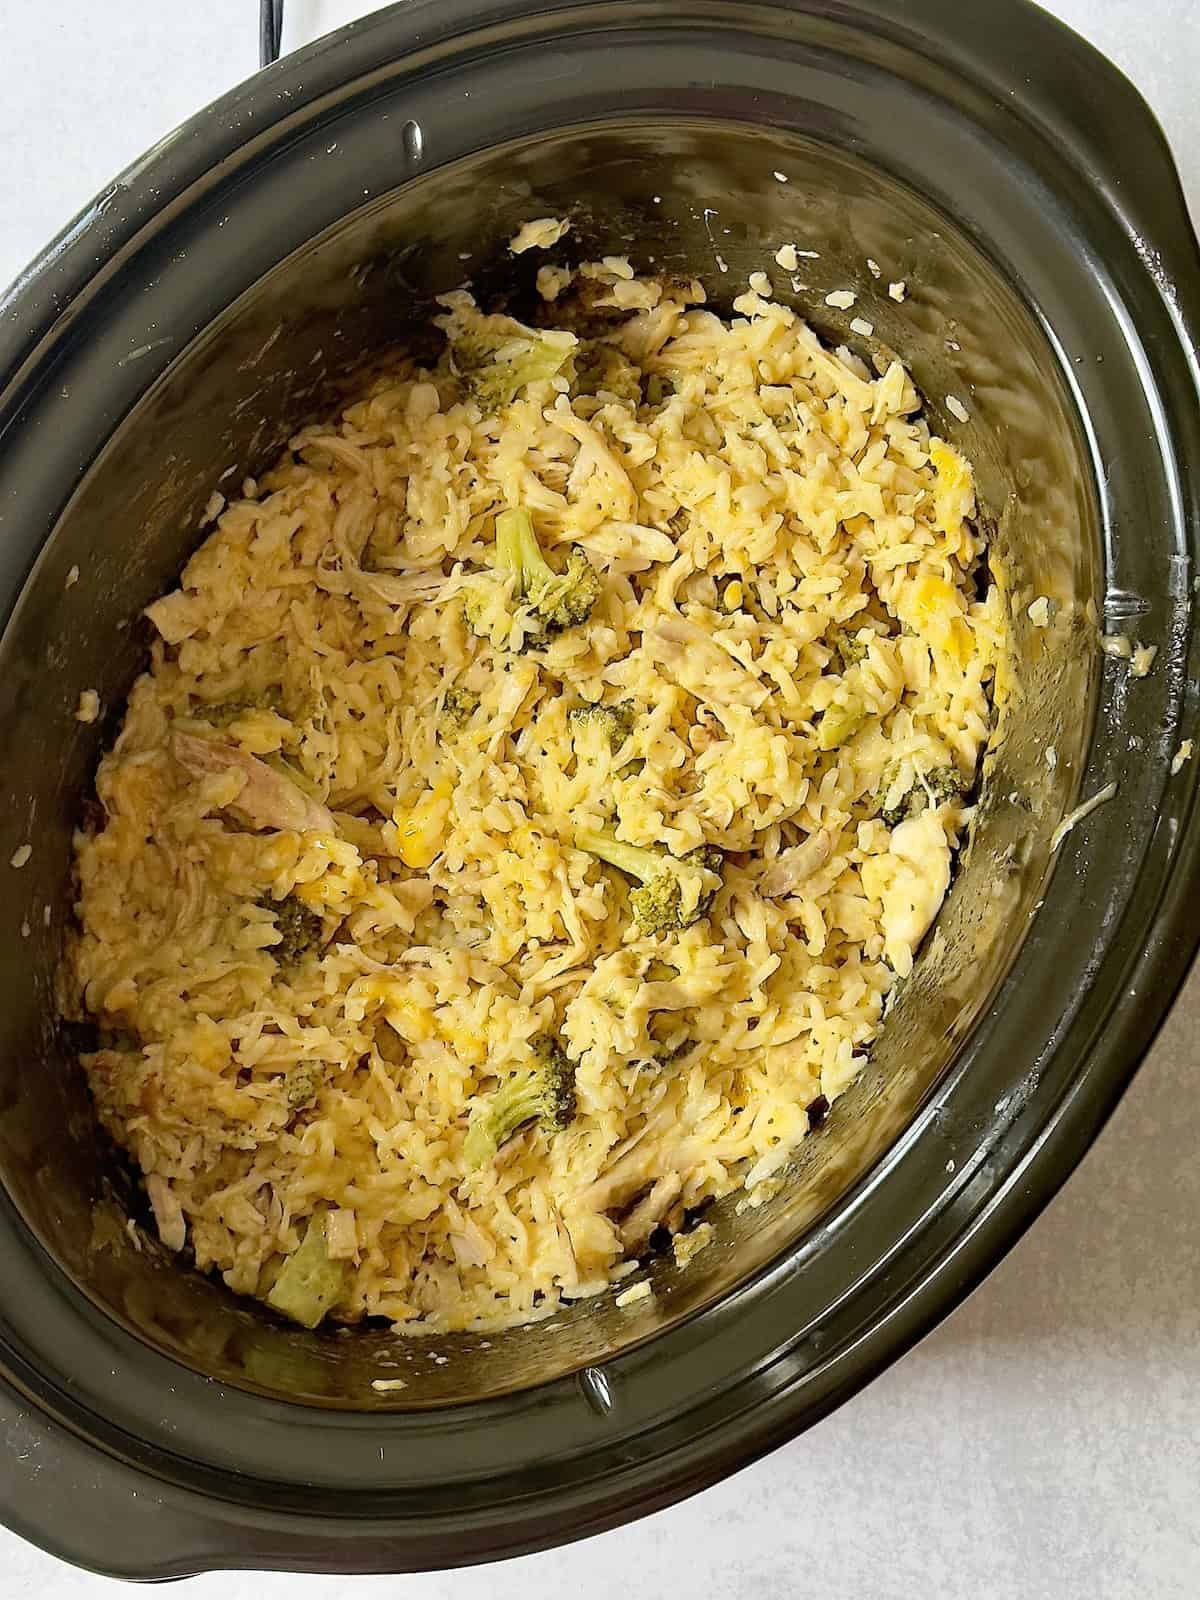 crockpot chicken rice and broccoli casserole in the slow cooker